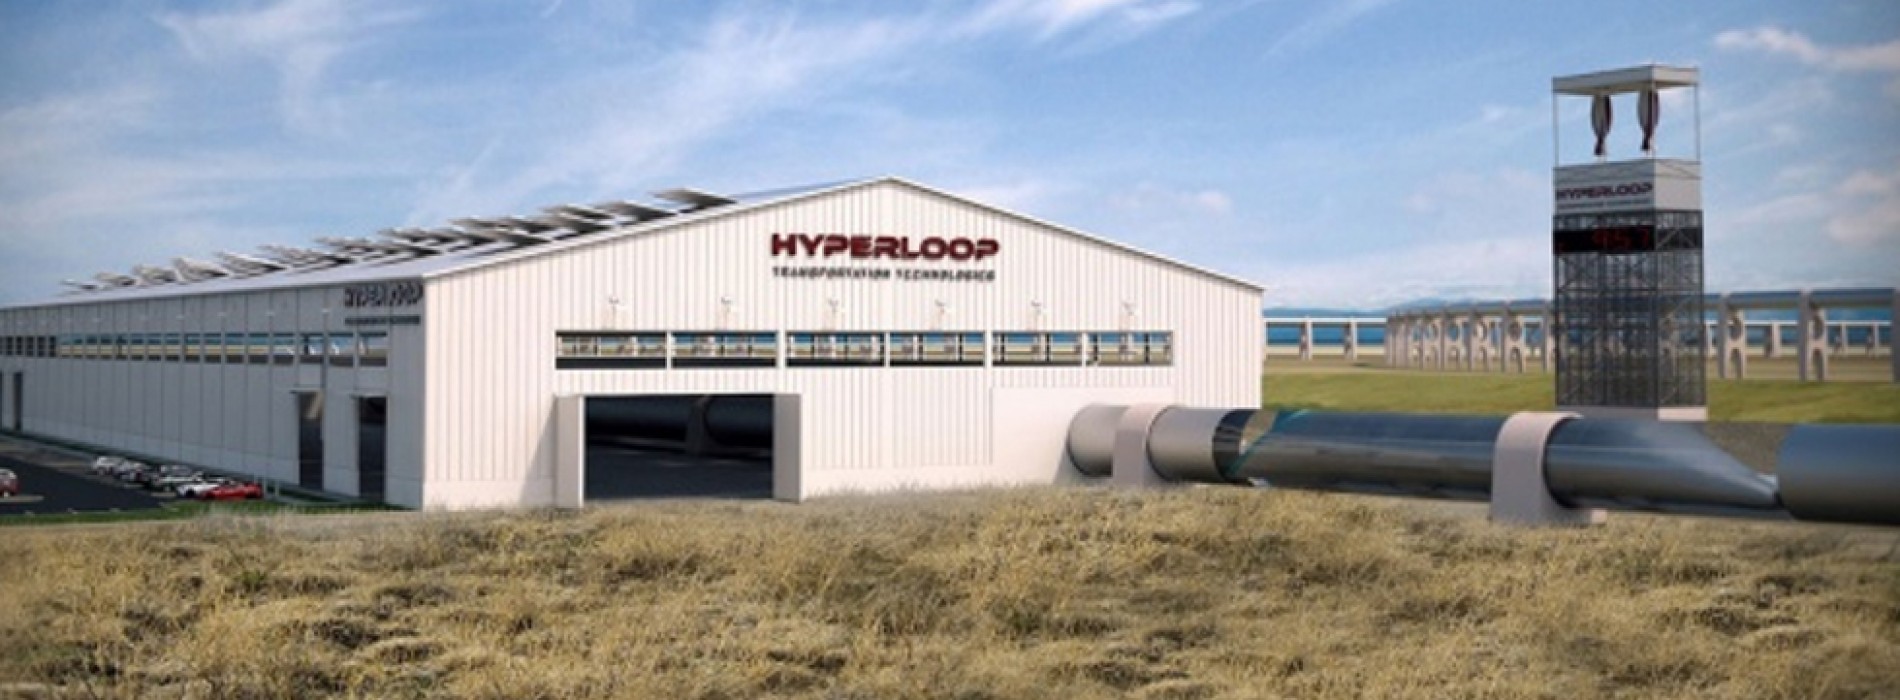 Hyperloop One comes to India but don’t dream of 1-hour Delhi-Mumbai journey yet